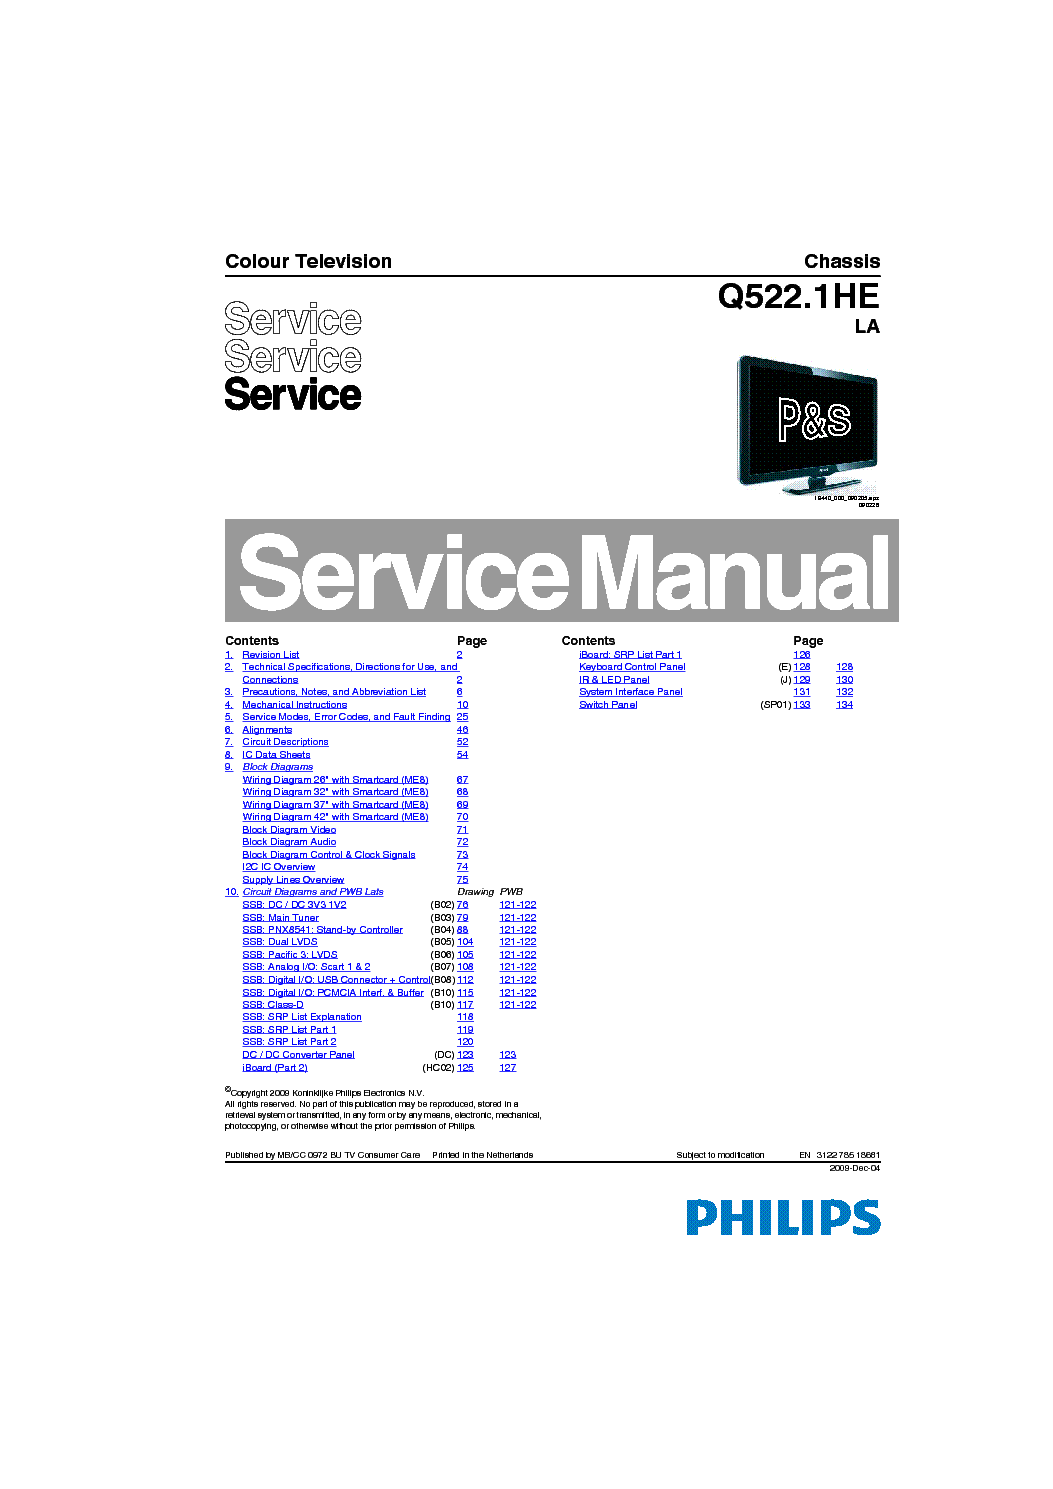 PHILIPS Q522.1HE LA LCD TV SM service manual (1st page)